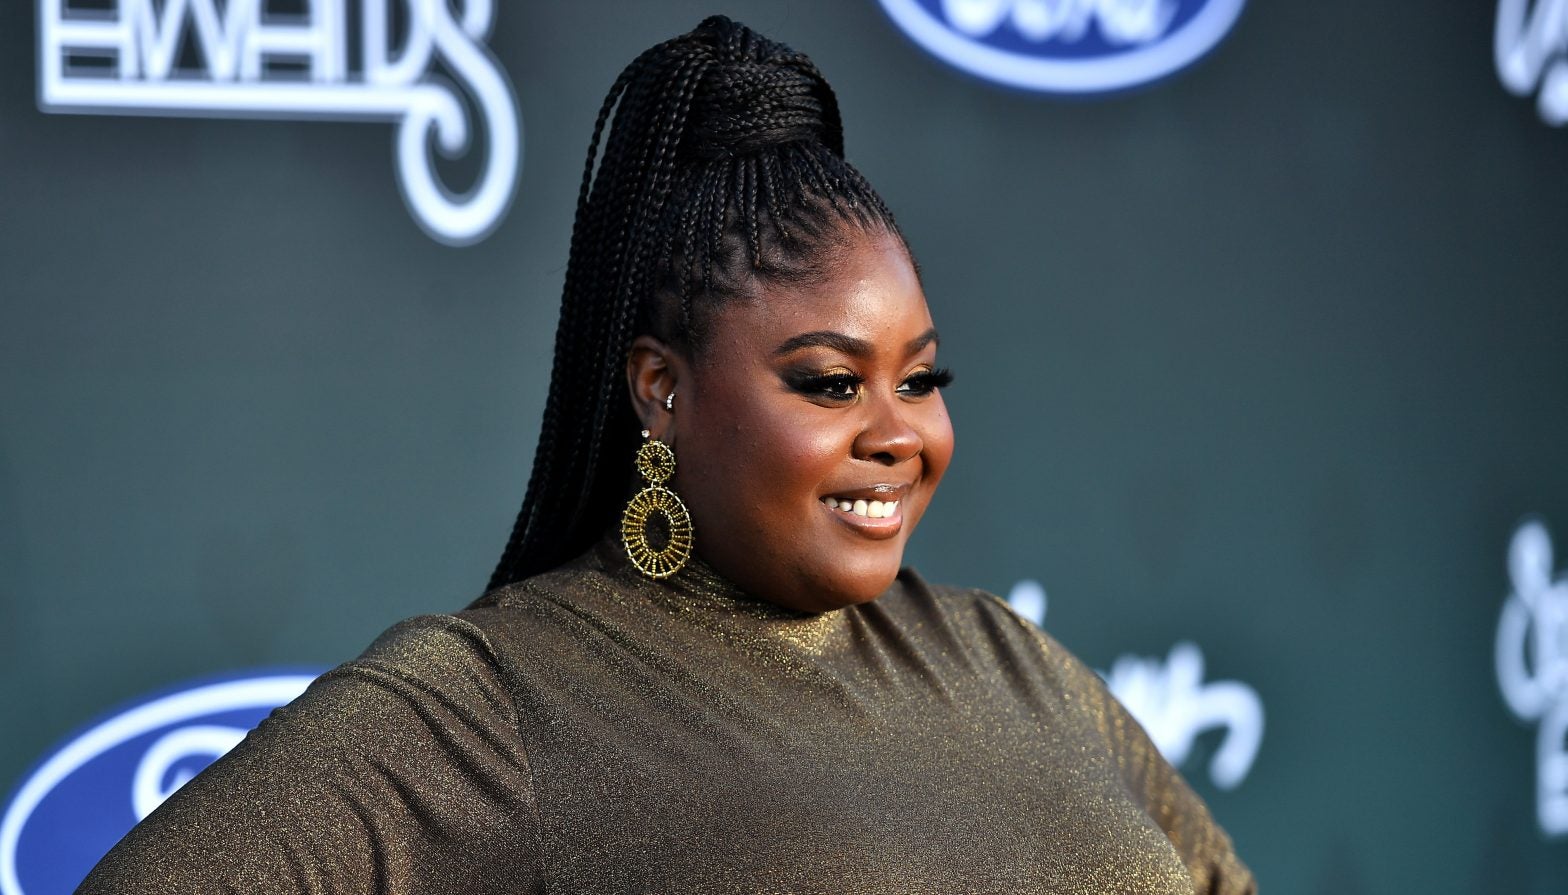 Actress Raven Goodwin Has The Cutest Pregnancy Glow